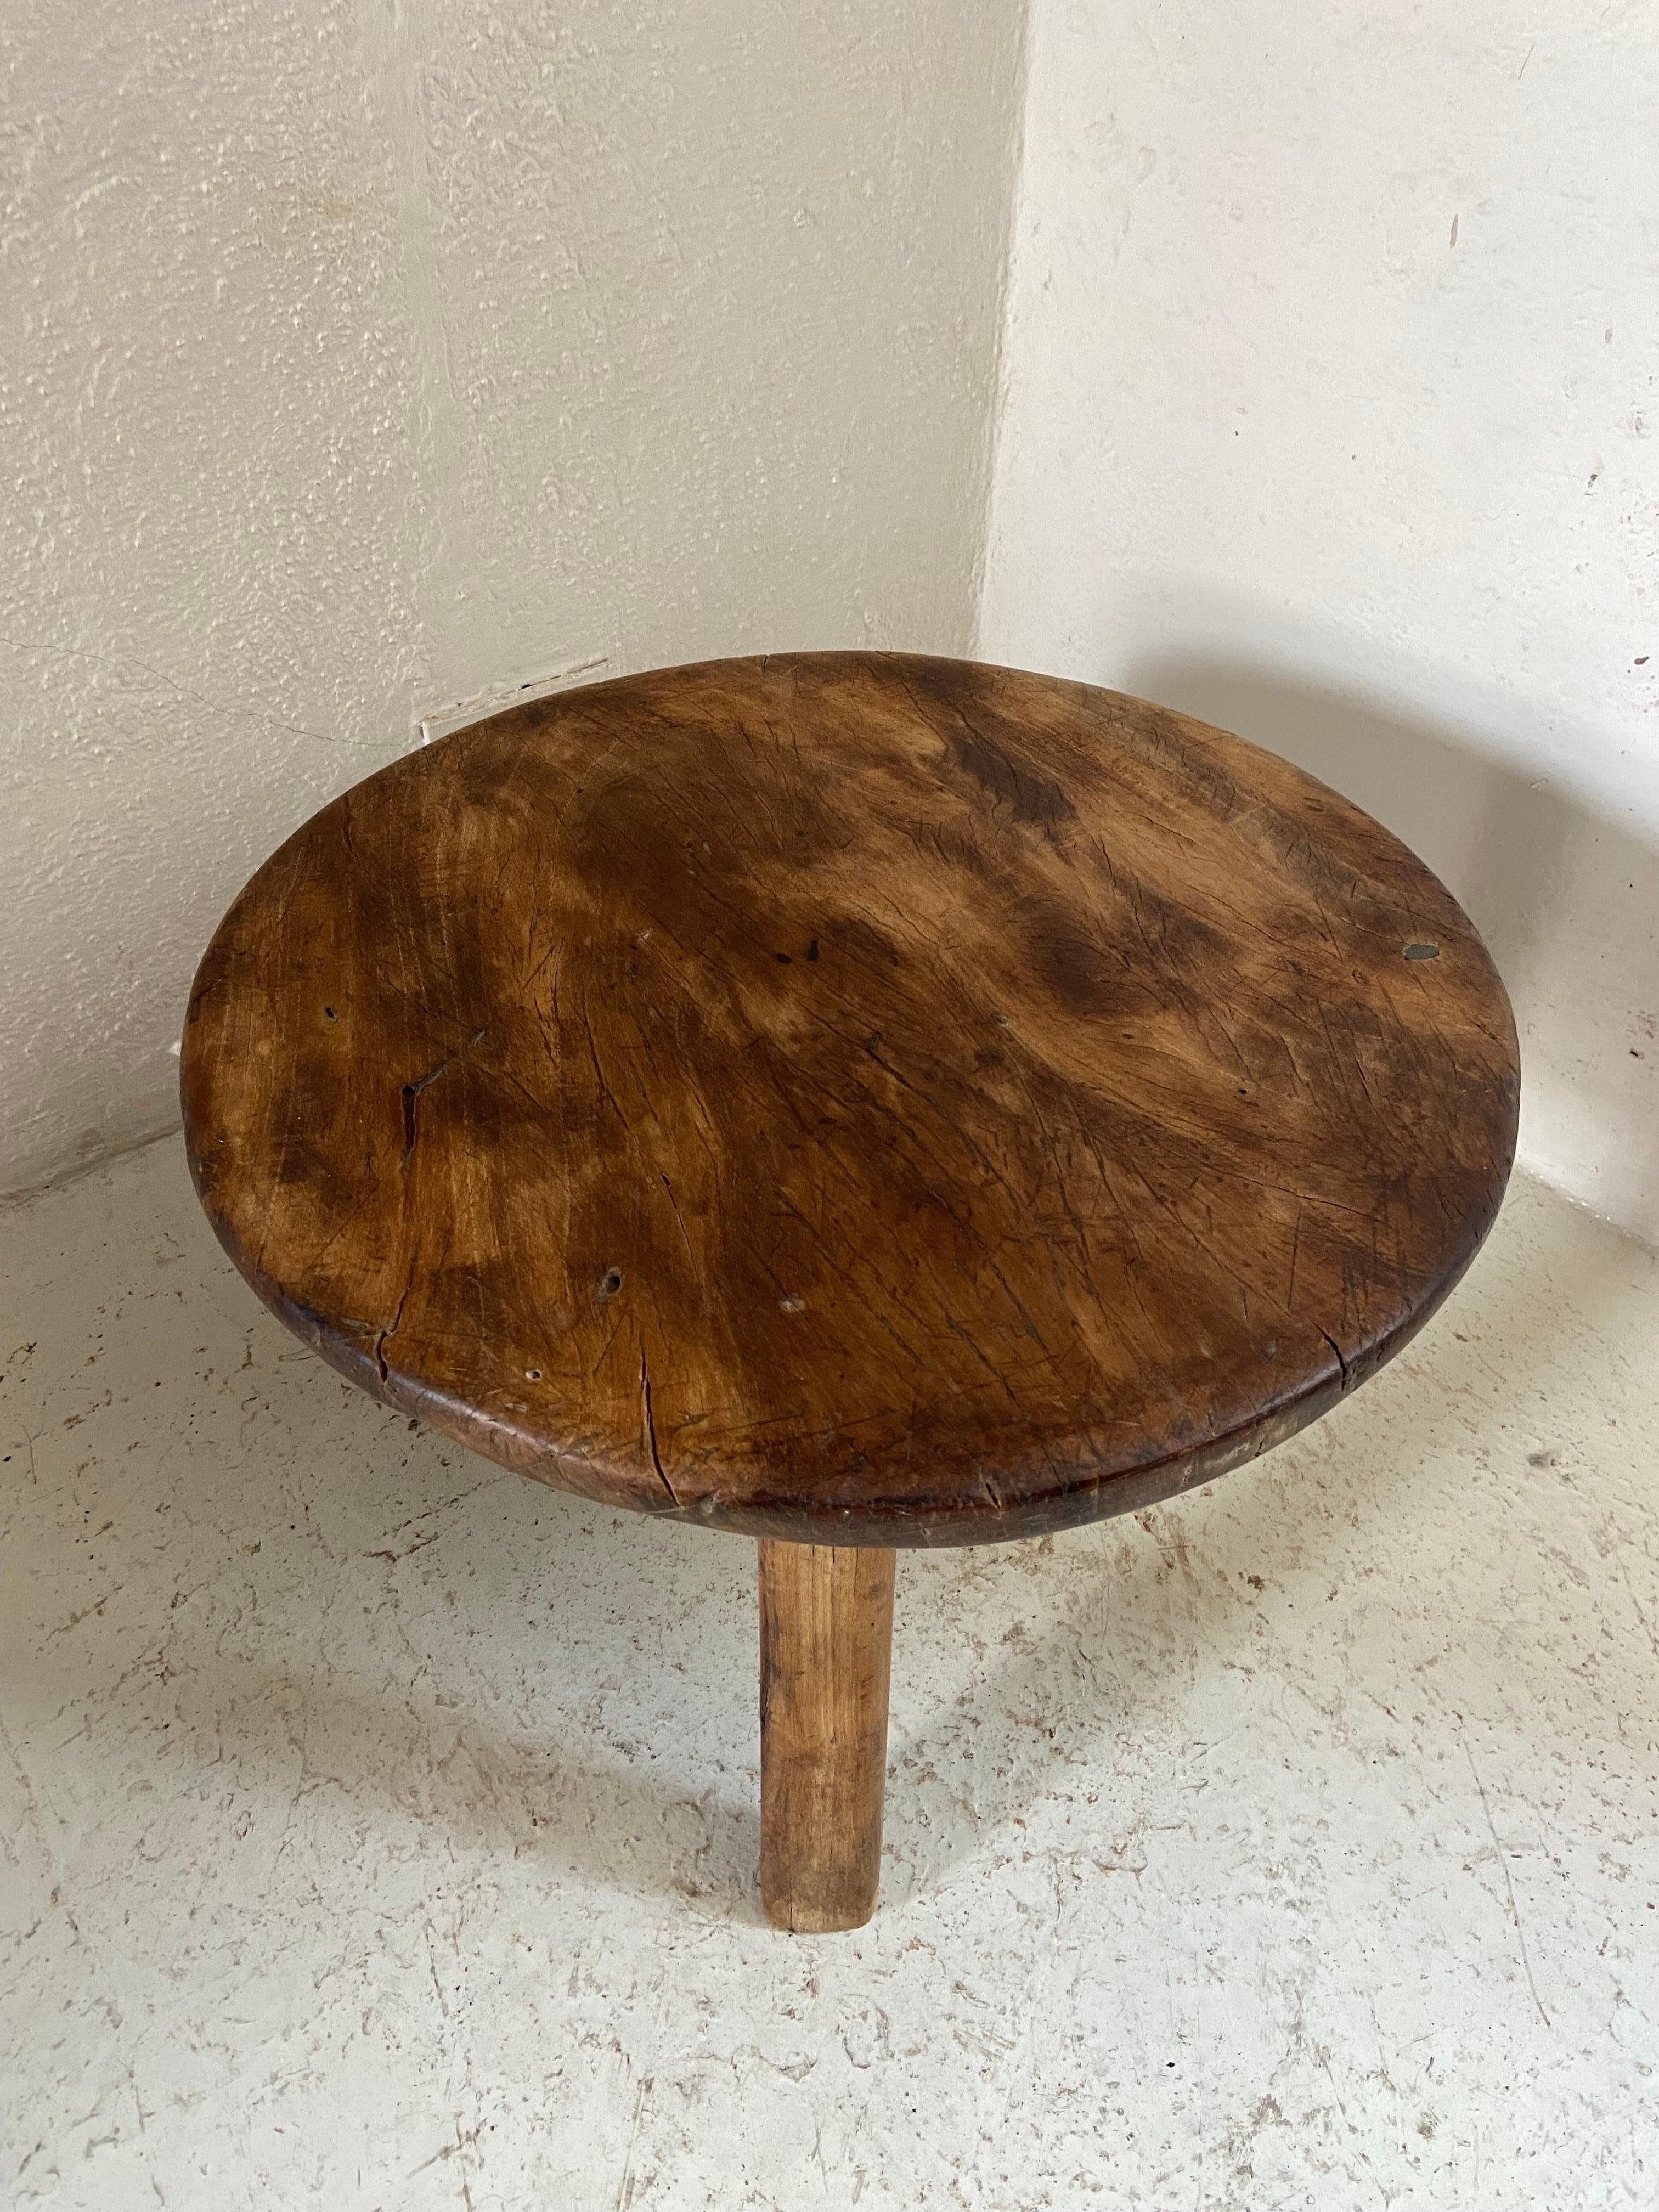 Hand carved Primitive low table from Central Yucatan, circa 1970s. This round table displays a fine example of precision, symmetry and beauty. All three legs are original which is rare, since these tables rest on mud or adobe floors which, from the